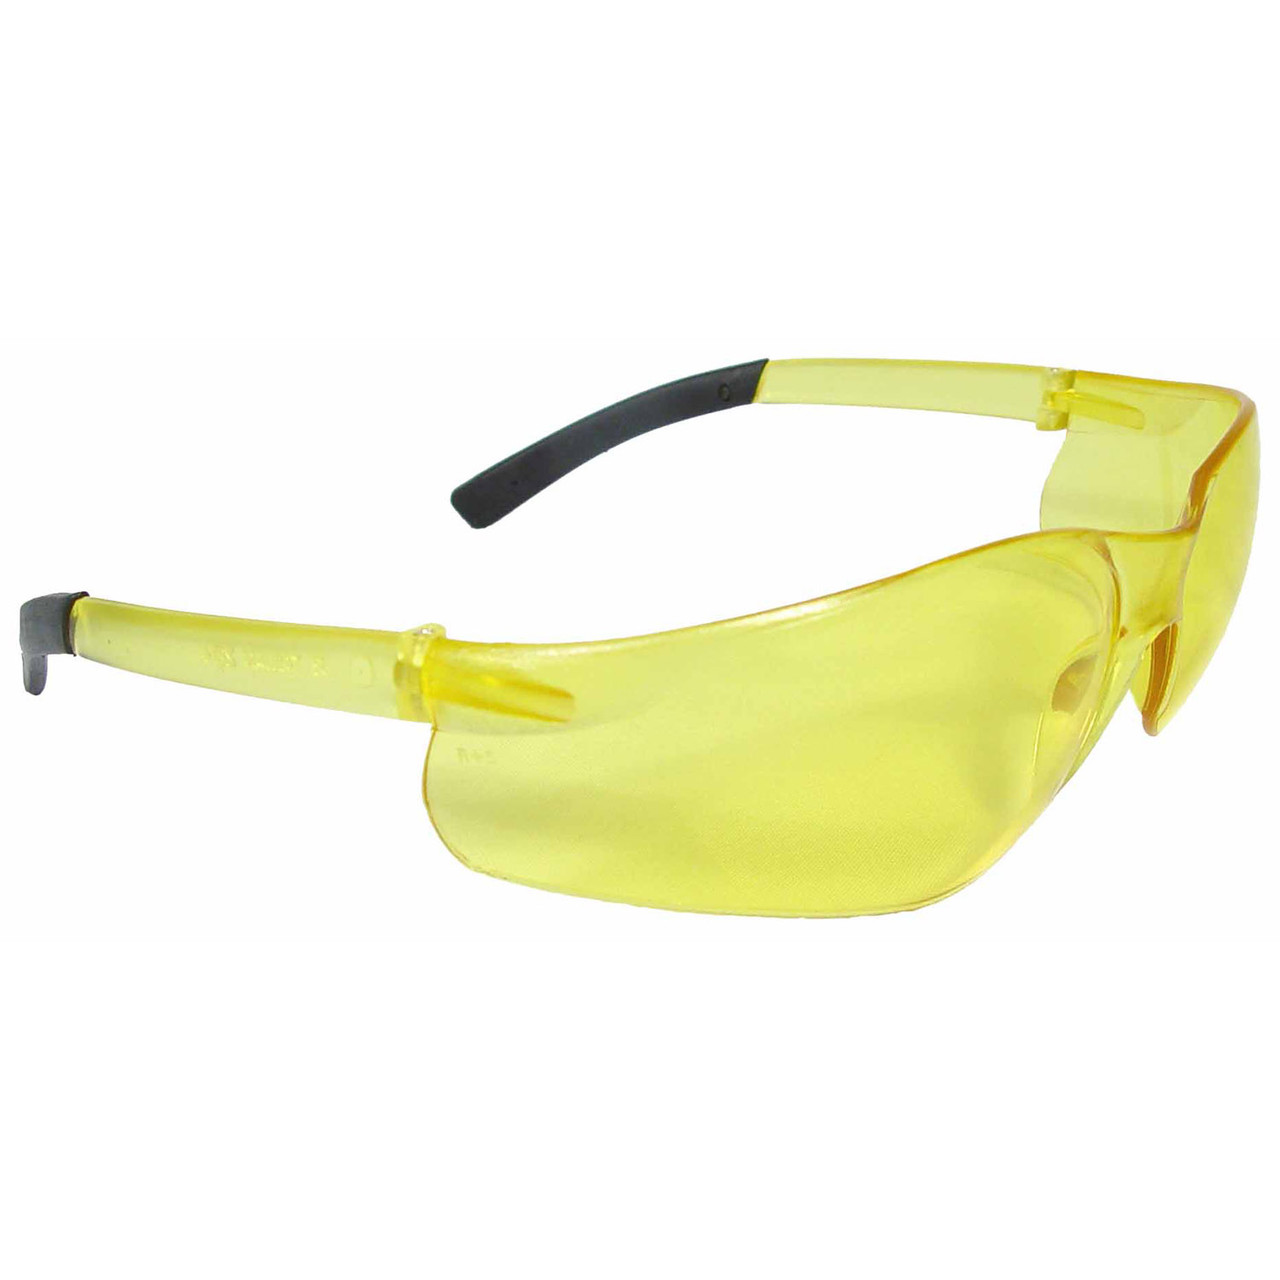 Radians AT1-40 Rad-Sequel Safety Glasses W/ Black Temple Tips And Amber Lens